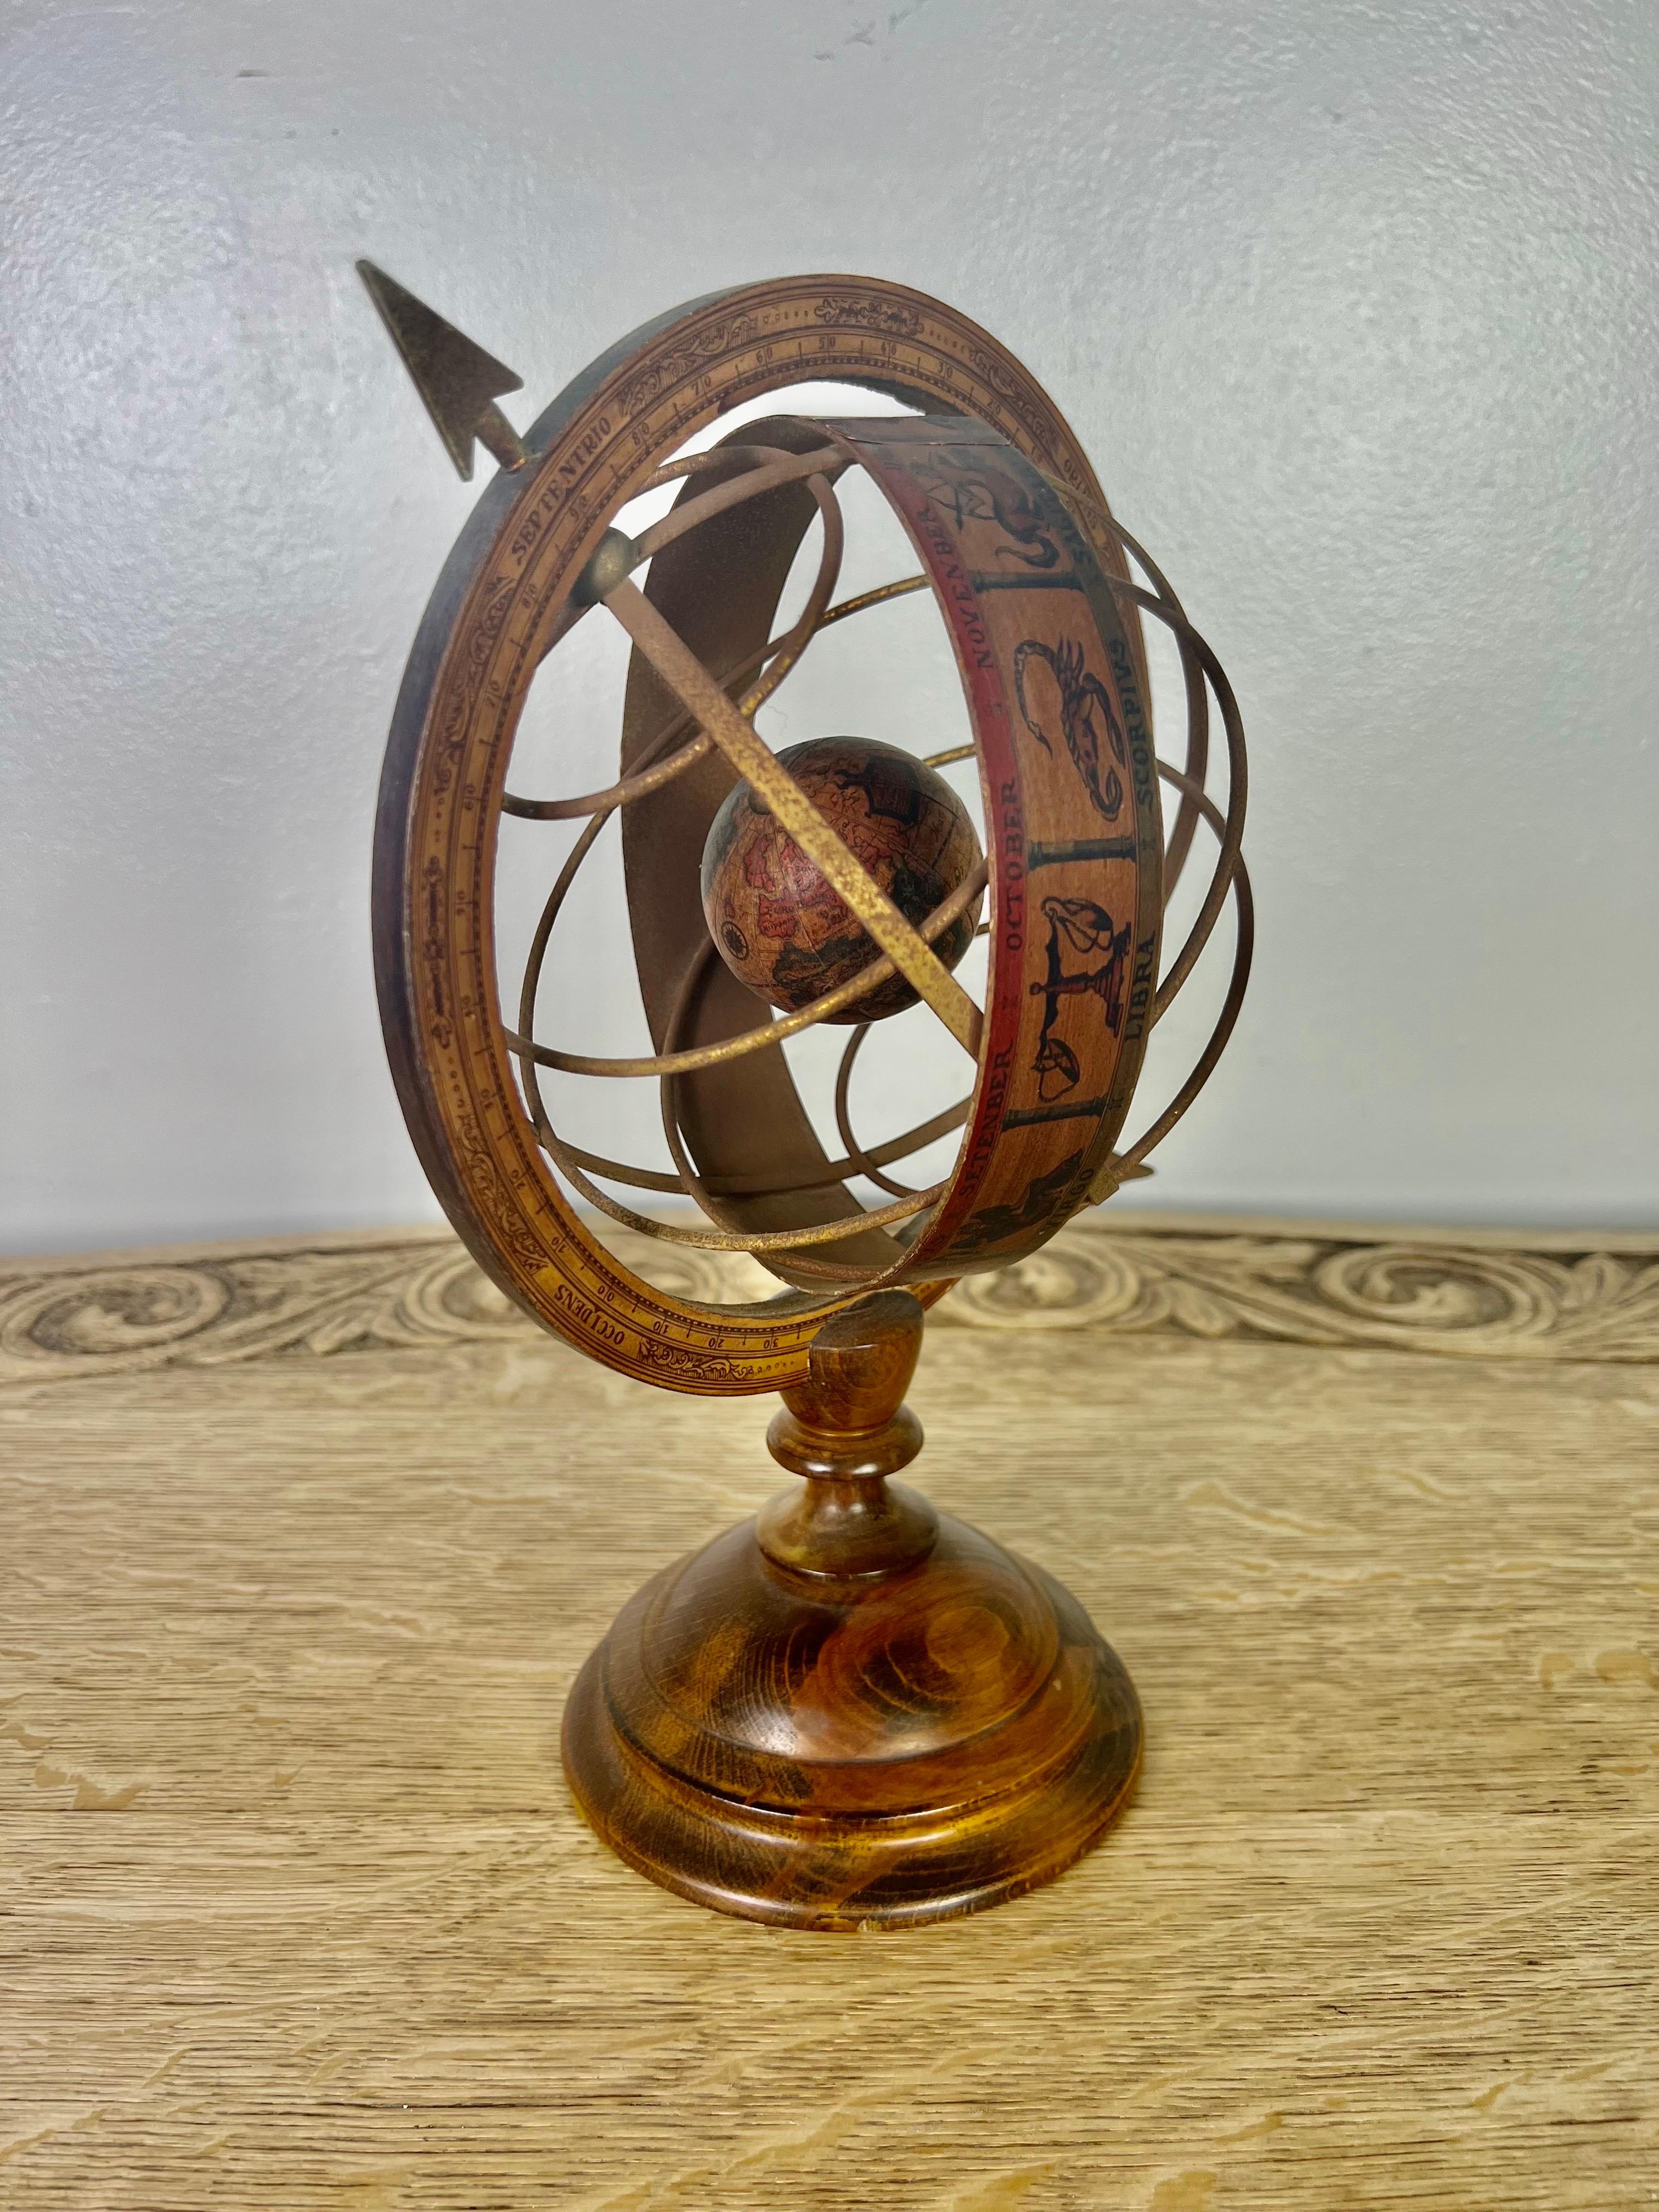 The armillary sphere is usually a ball representing the earth. It is used to demonstrate the motion of the stars consisting of a spherical framework of rings that represent lines of celestial longitude and latitude and other astronomically important